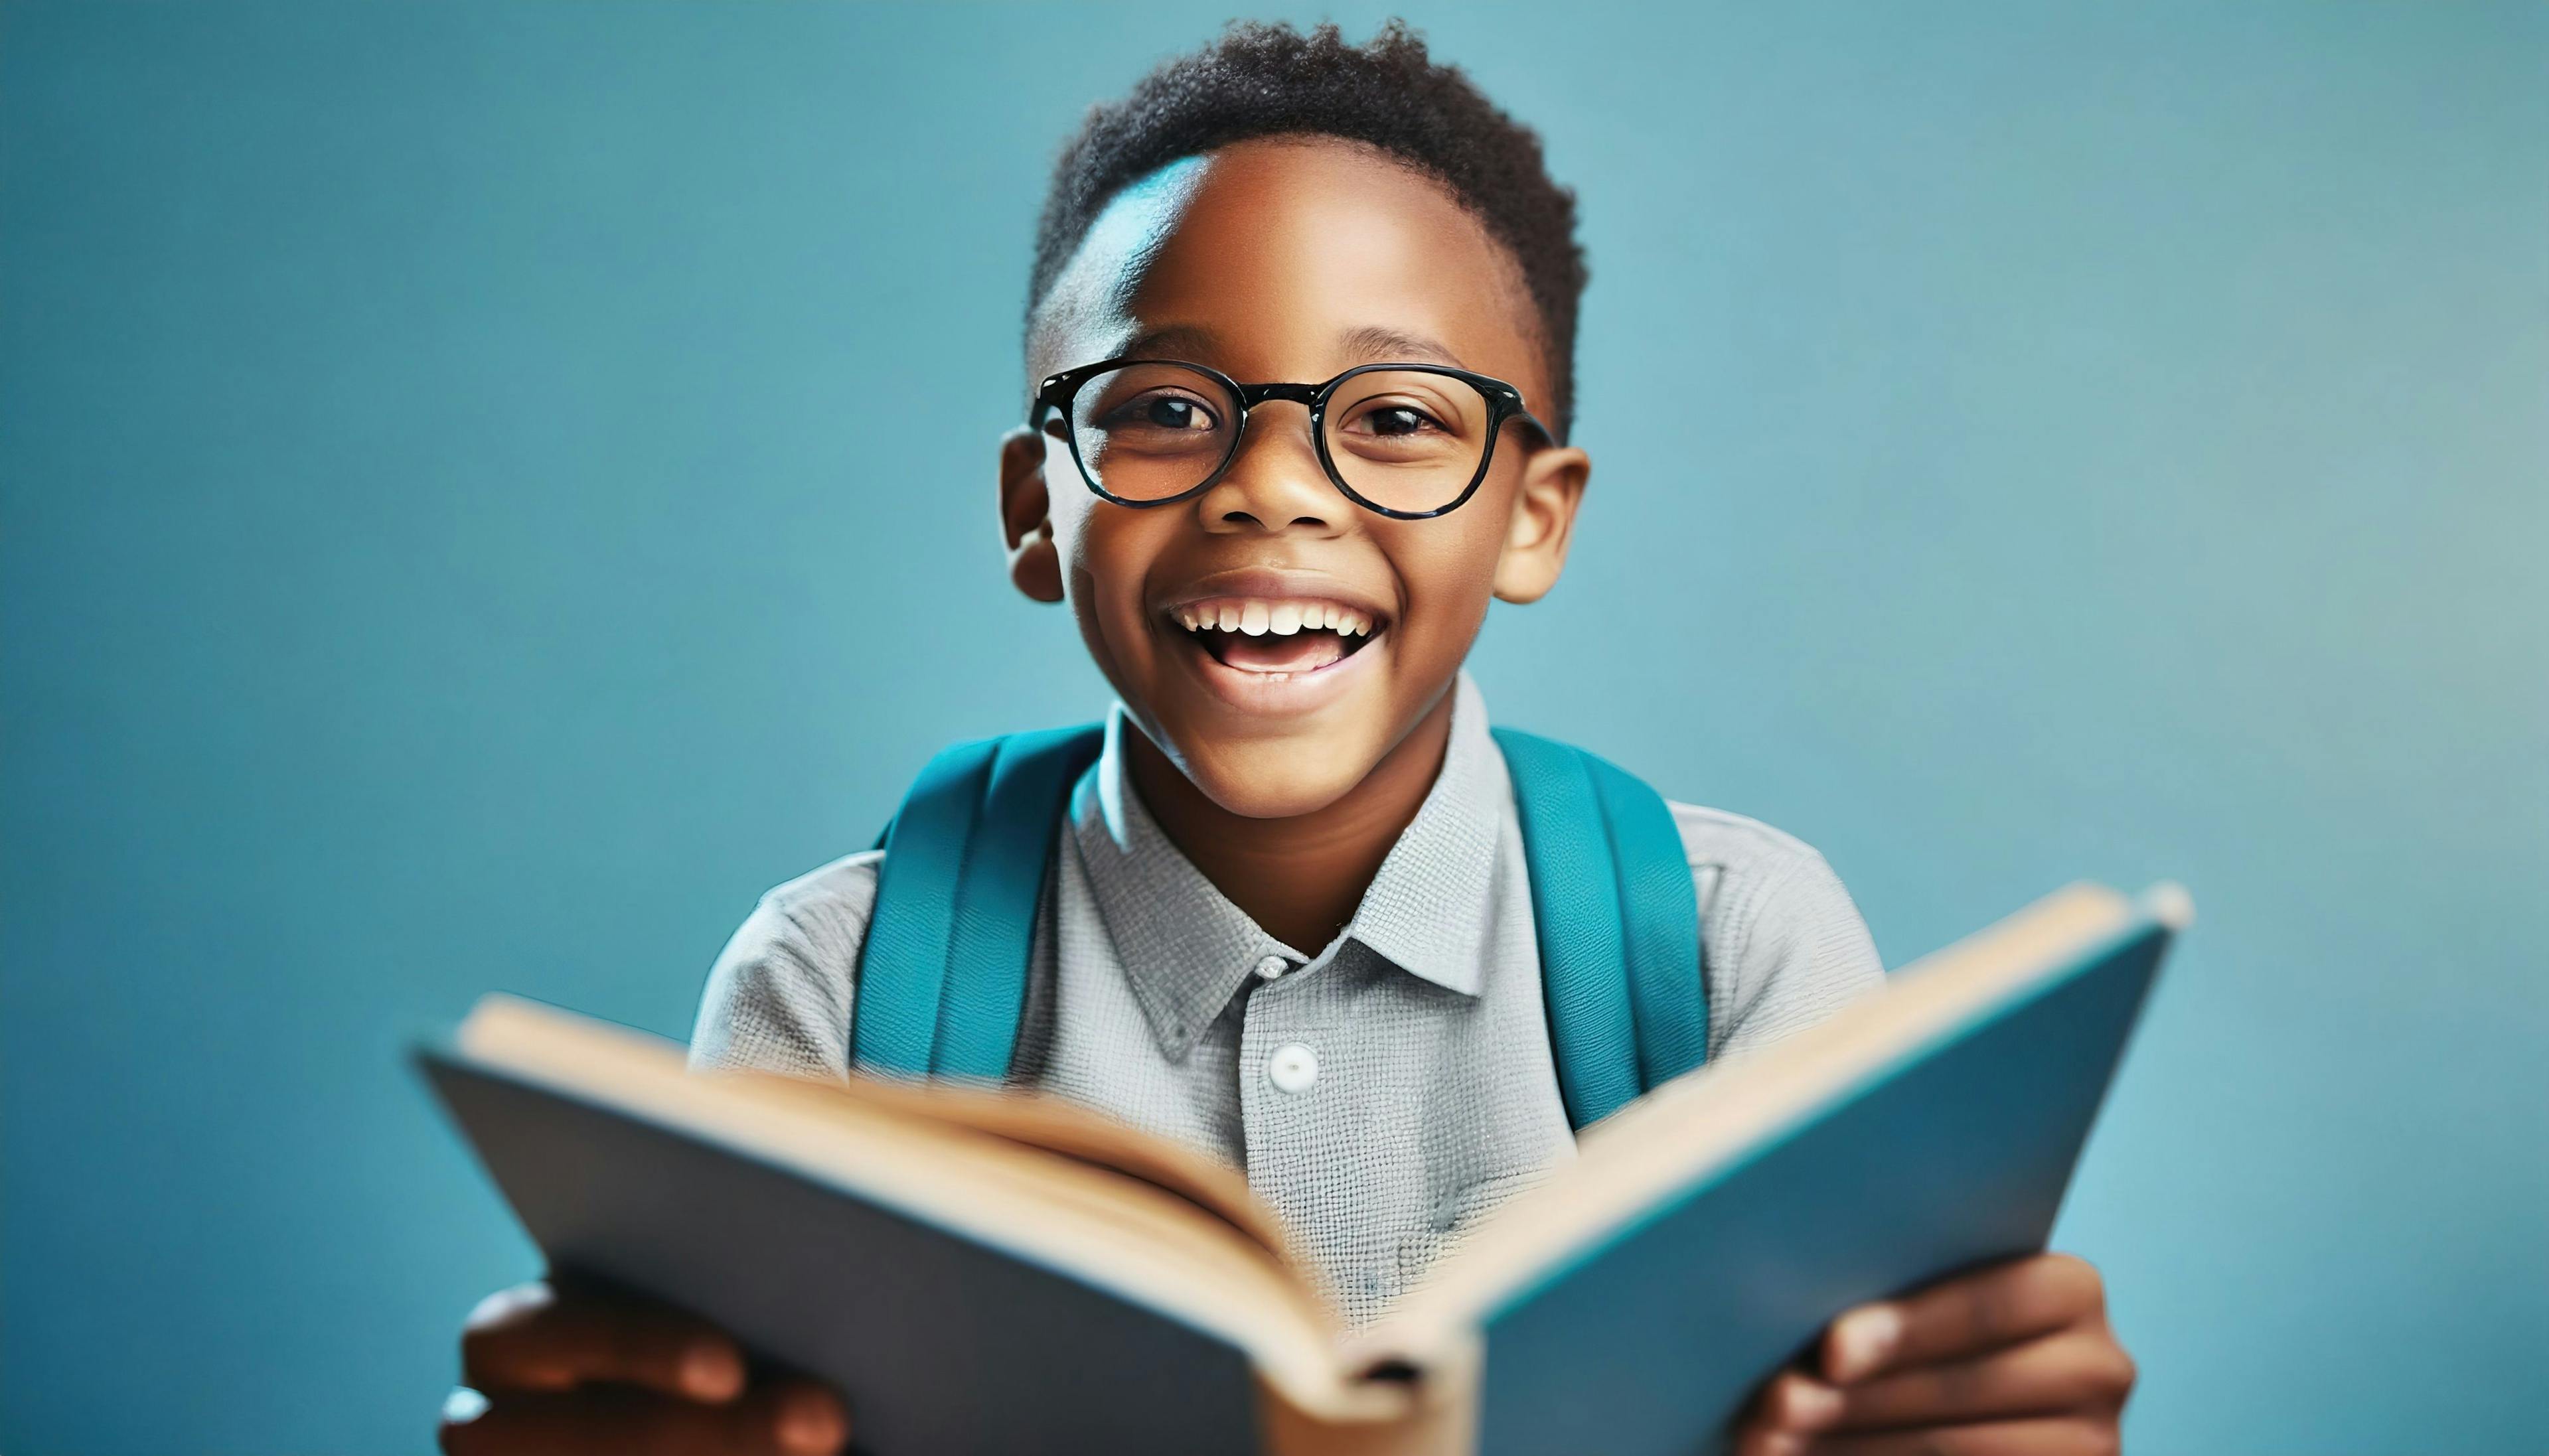 Little boy wearing glasses smiling while reading a picture book